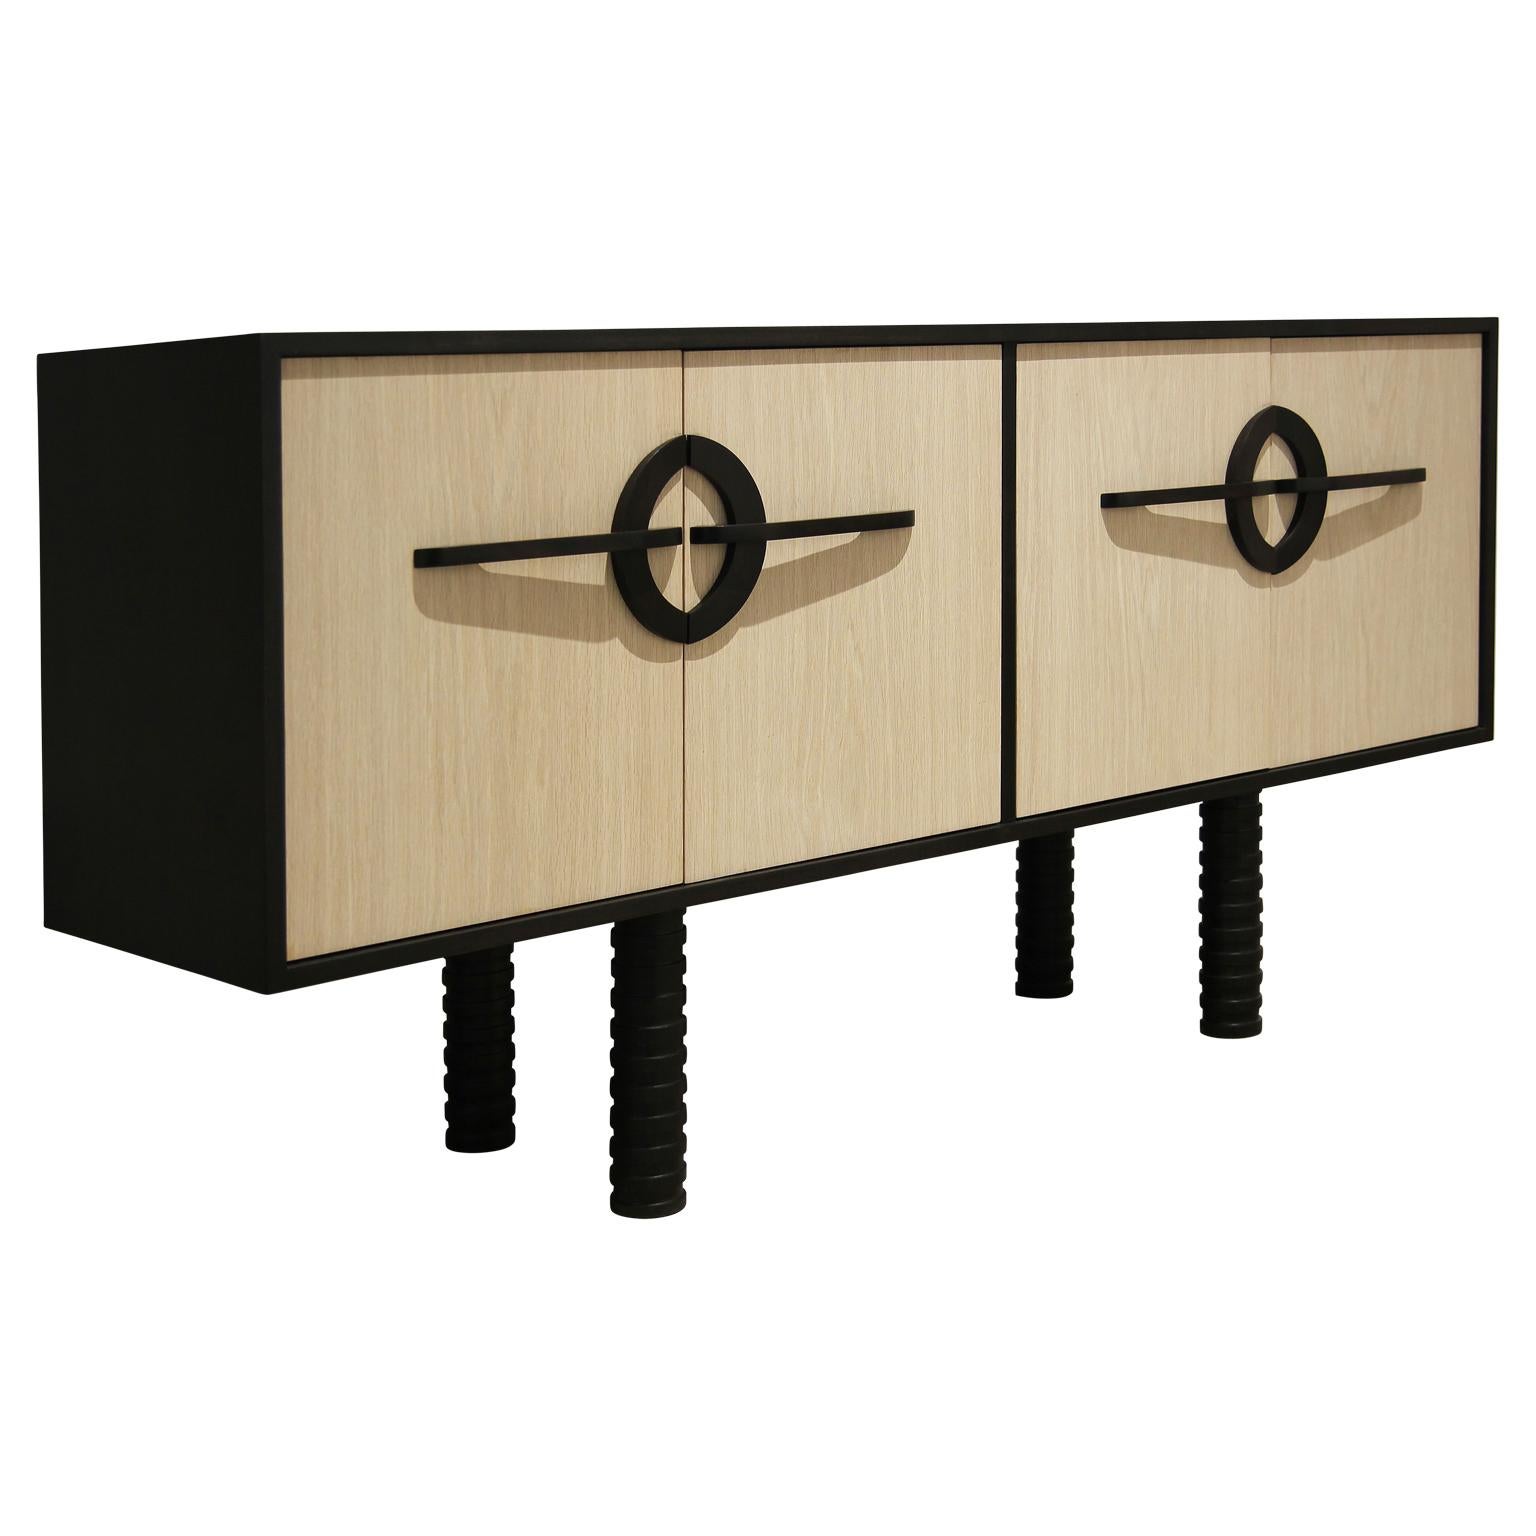 Custom modern organic carved two-tone natural and black sideboard handmade in Houston, Texas by Reeves Art + Design. The legs are hand turned out of oak featuring a ribbed look. The handles have an organic shape which were hand carved and stained